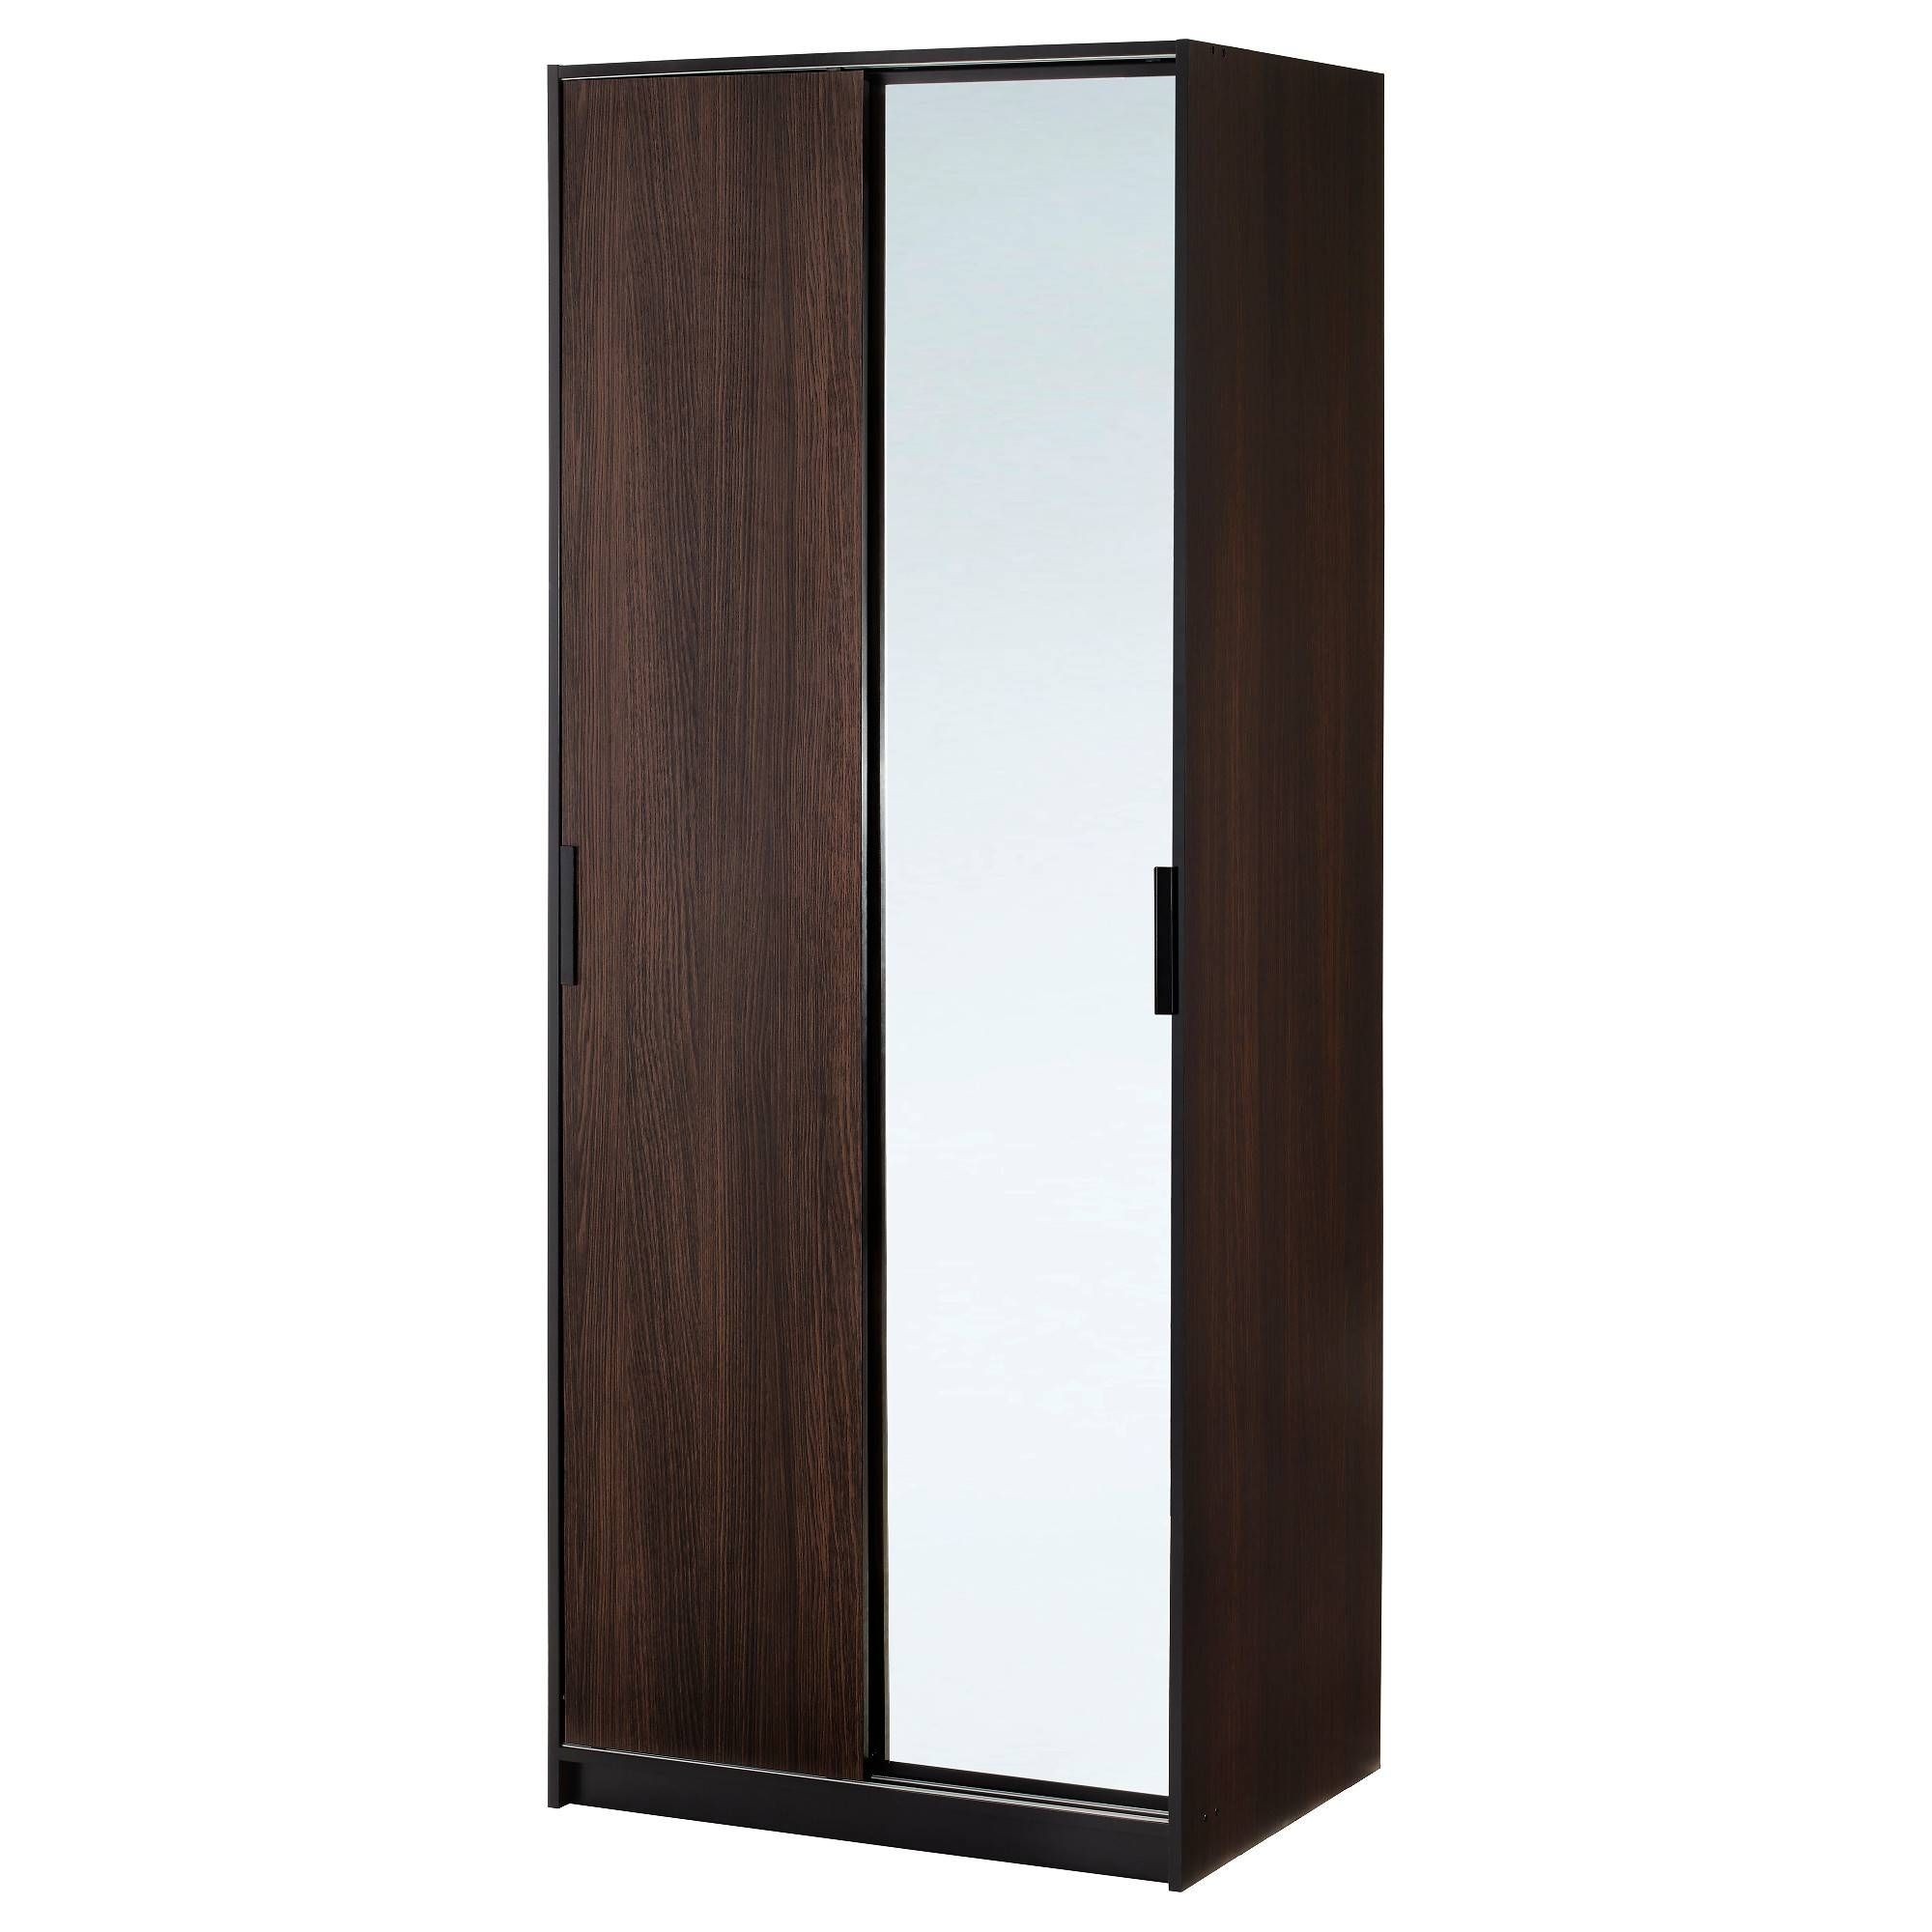 Wardrobes, Armoires & Closets – Ikea With Regard To Dark Wood Wardrobe With Drawers (View 12 of 30)